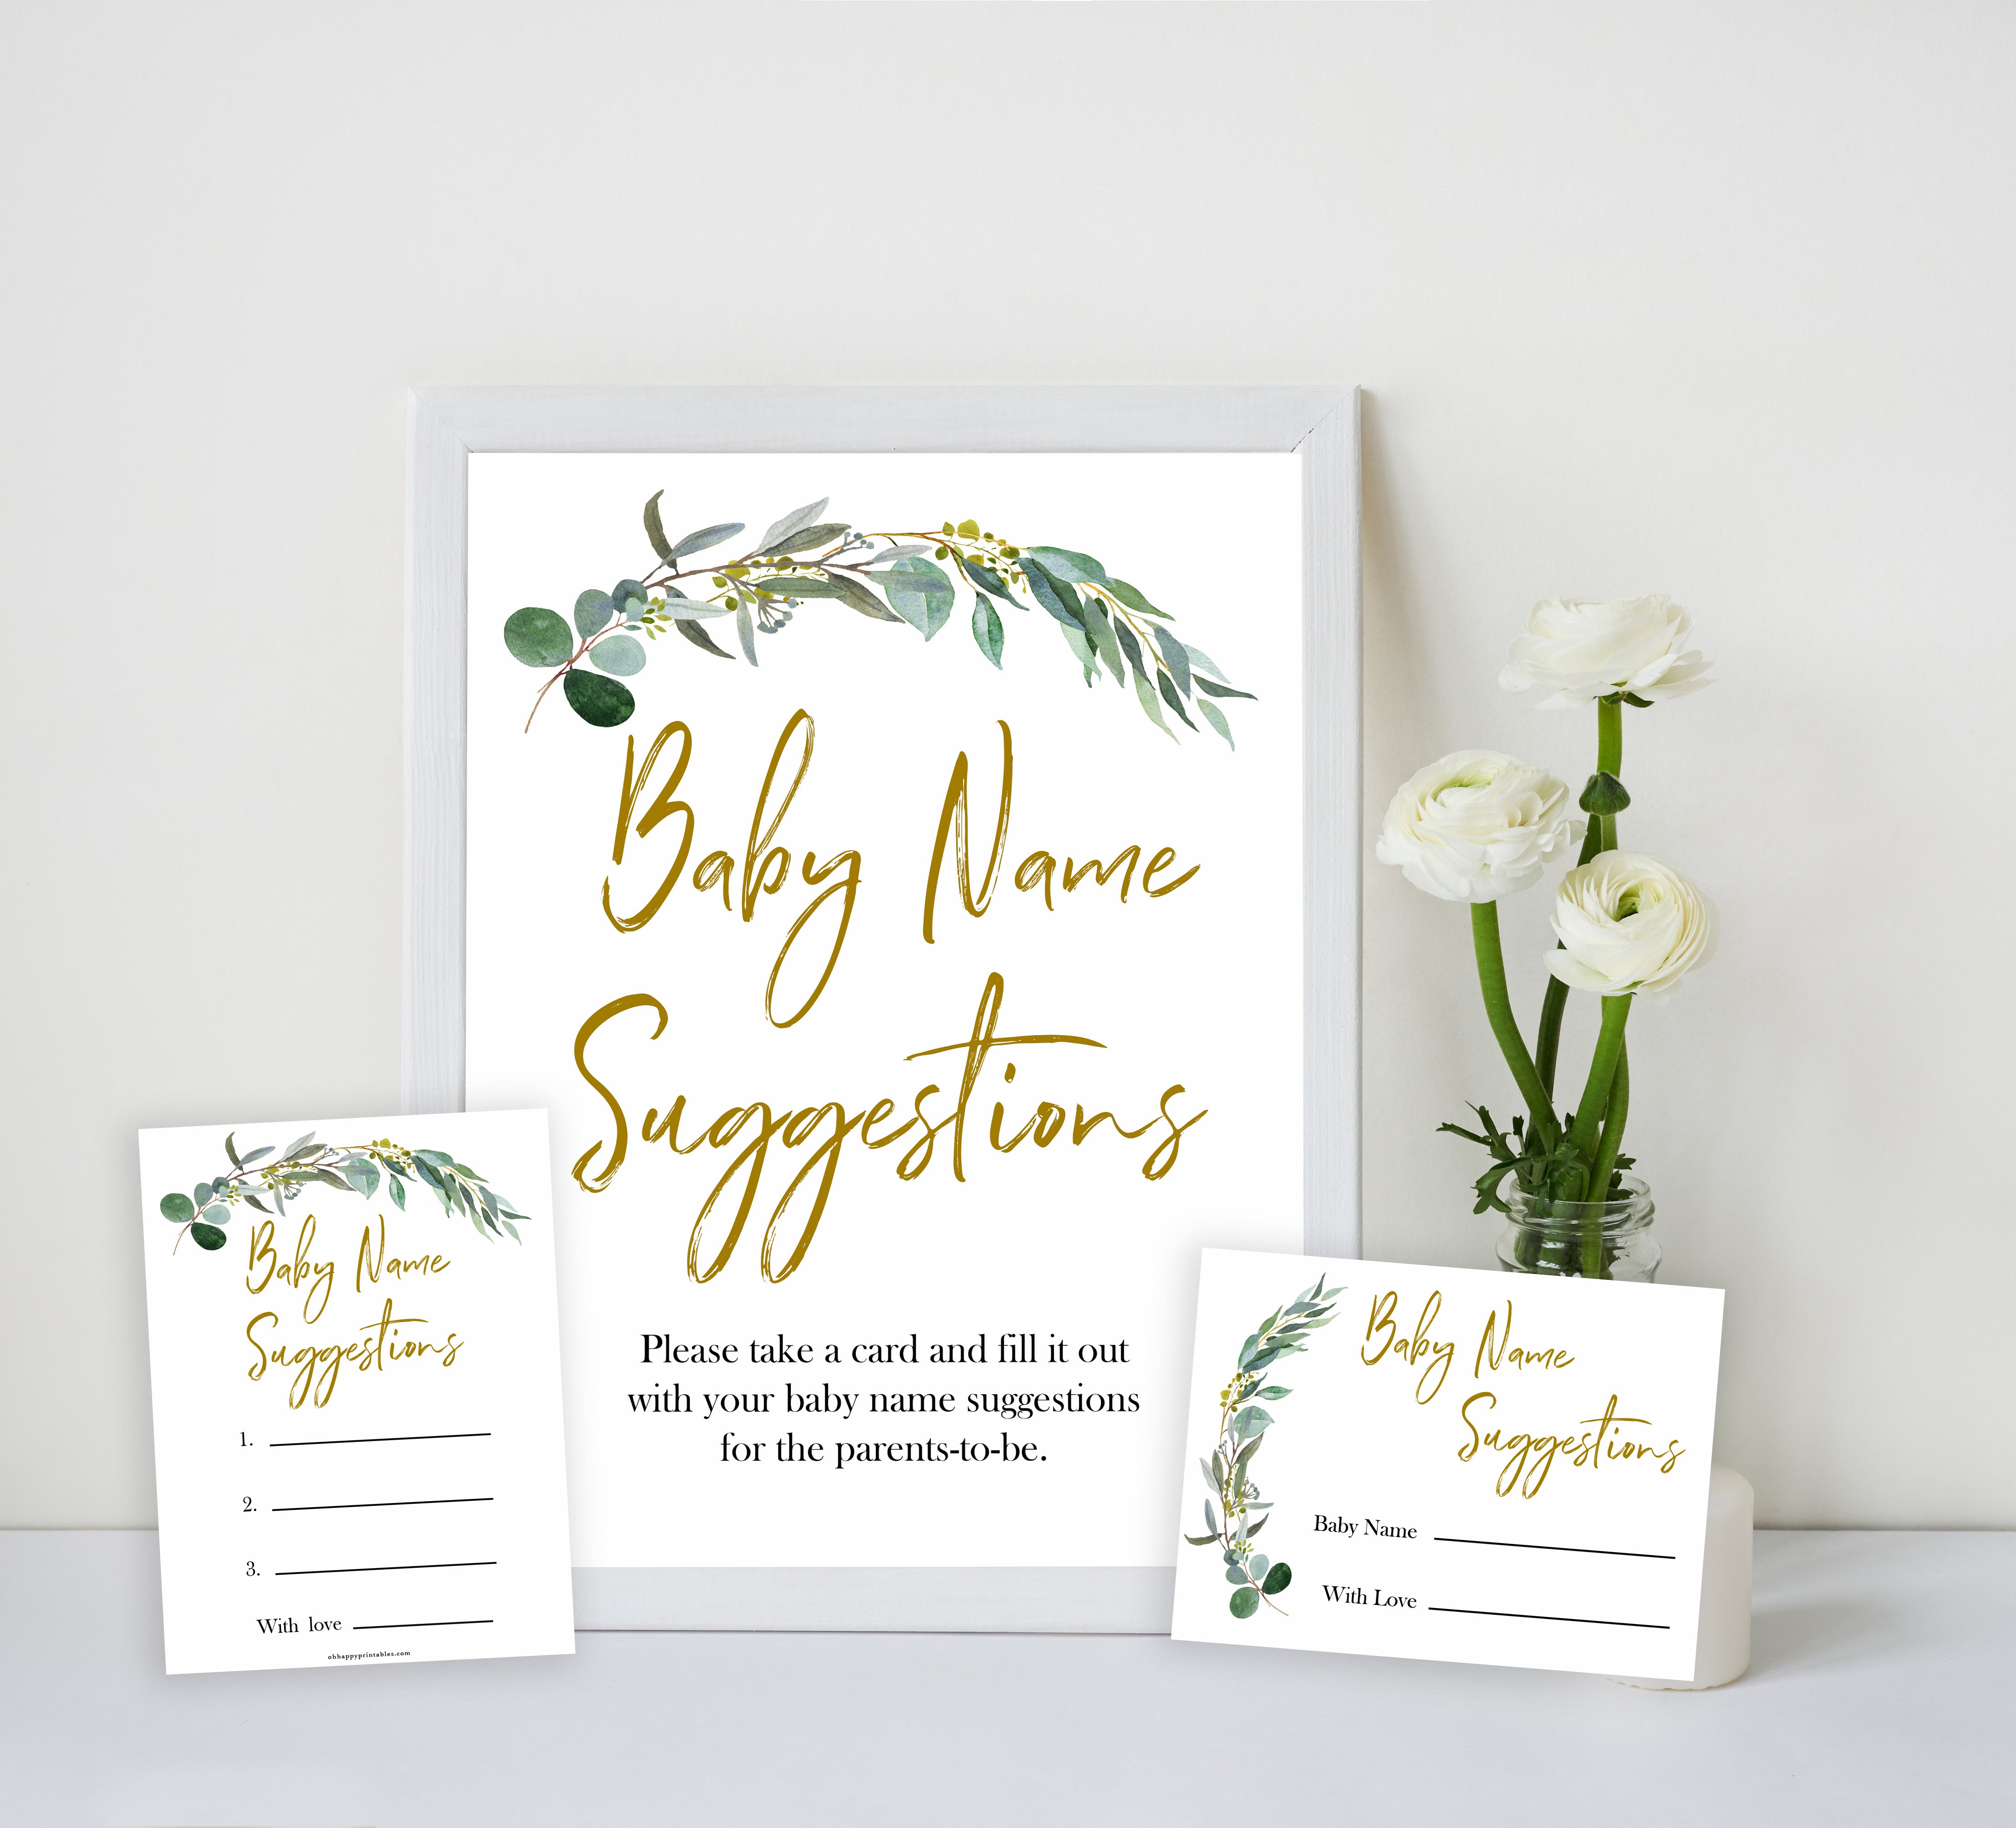 Eucalyptus baby shower games, baby name suggestions baby game, fun baby shower games, printable baby games, baby shower ideas, baby games, baby shower baby shower bundle, baby shower games packs, botanical baby shower